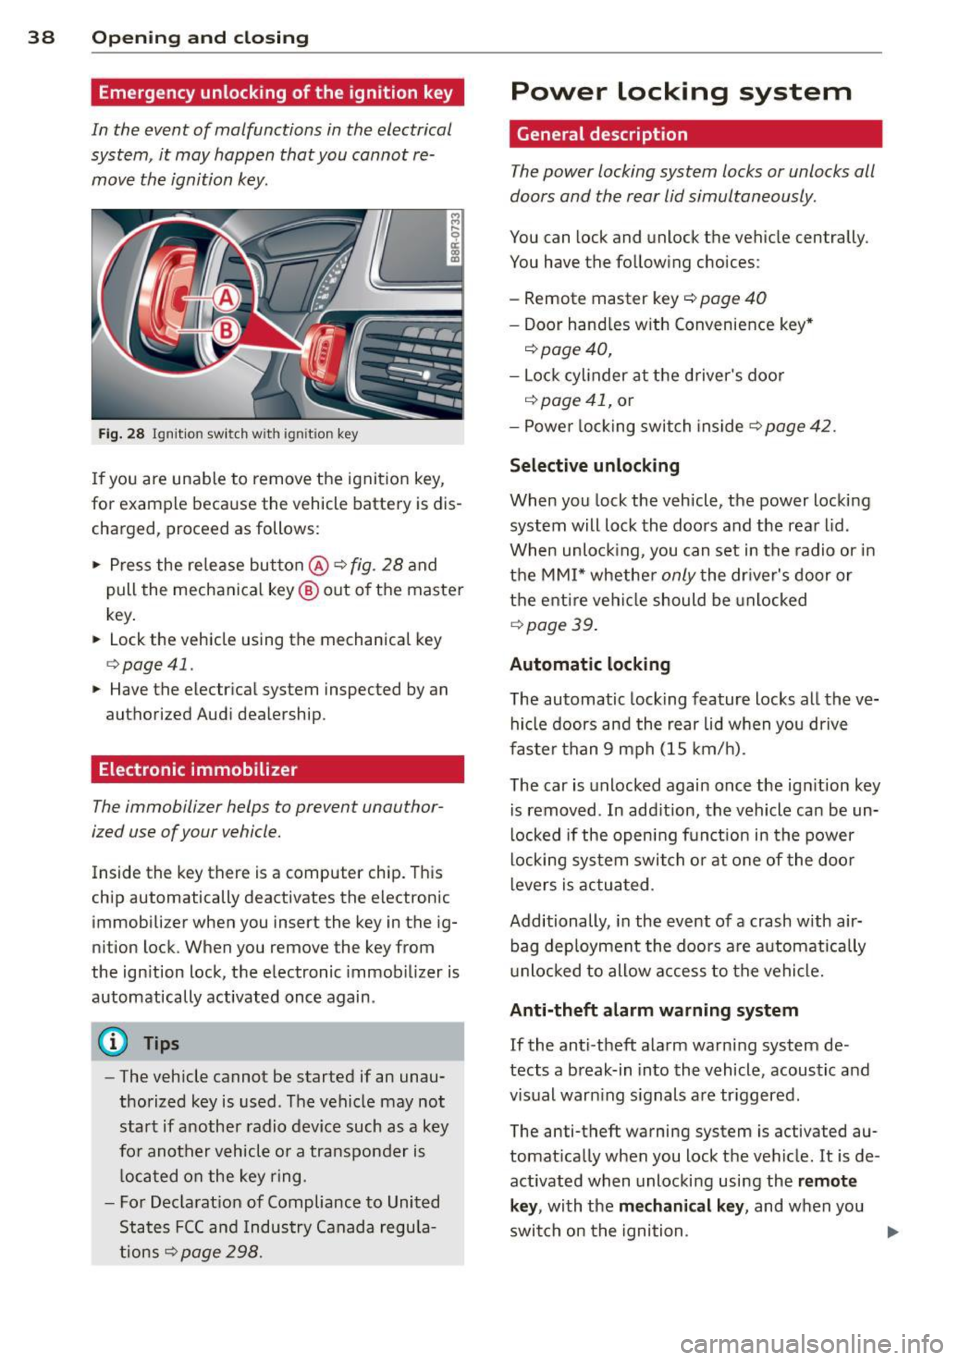 AUDI Q5 2013 Owners Guide 38  Openin g and  clo sing 
Emergency unlocking  of the  ignition  key 
In  the  event  of  malfunc tions in  the  electrical 
system,  it  may  happen  that  you  cannot  re­
move  the  ignition  ke